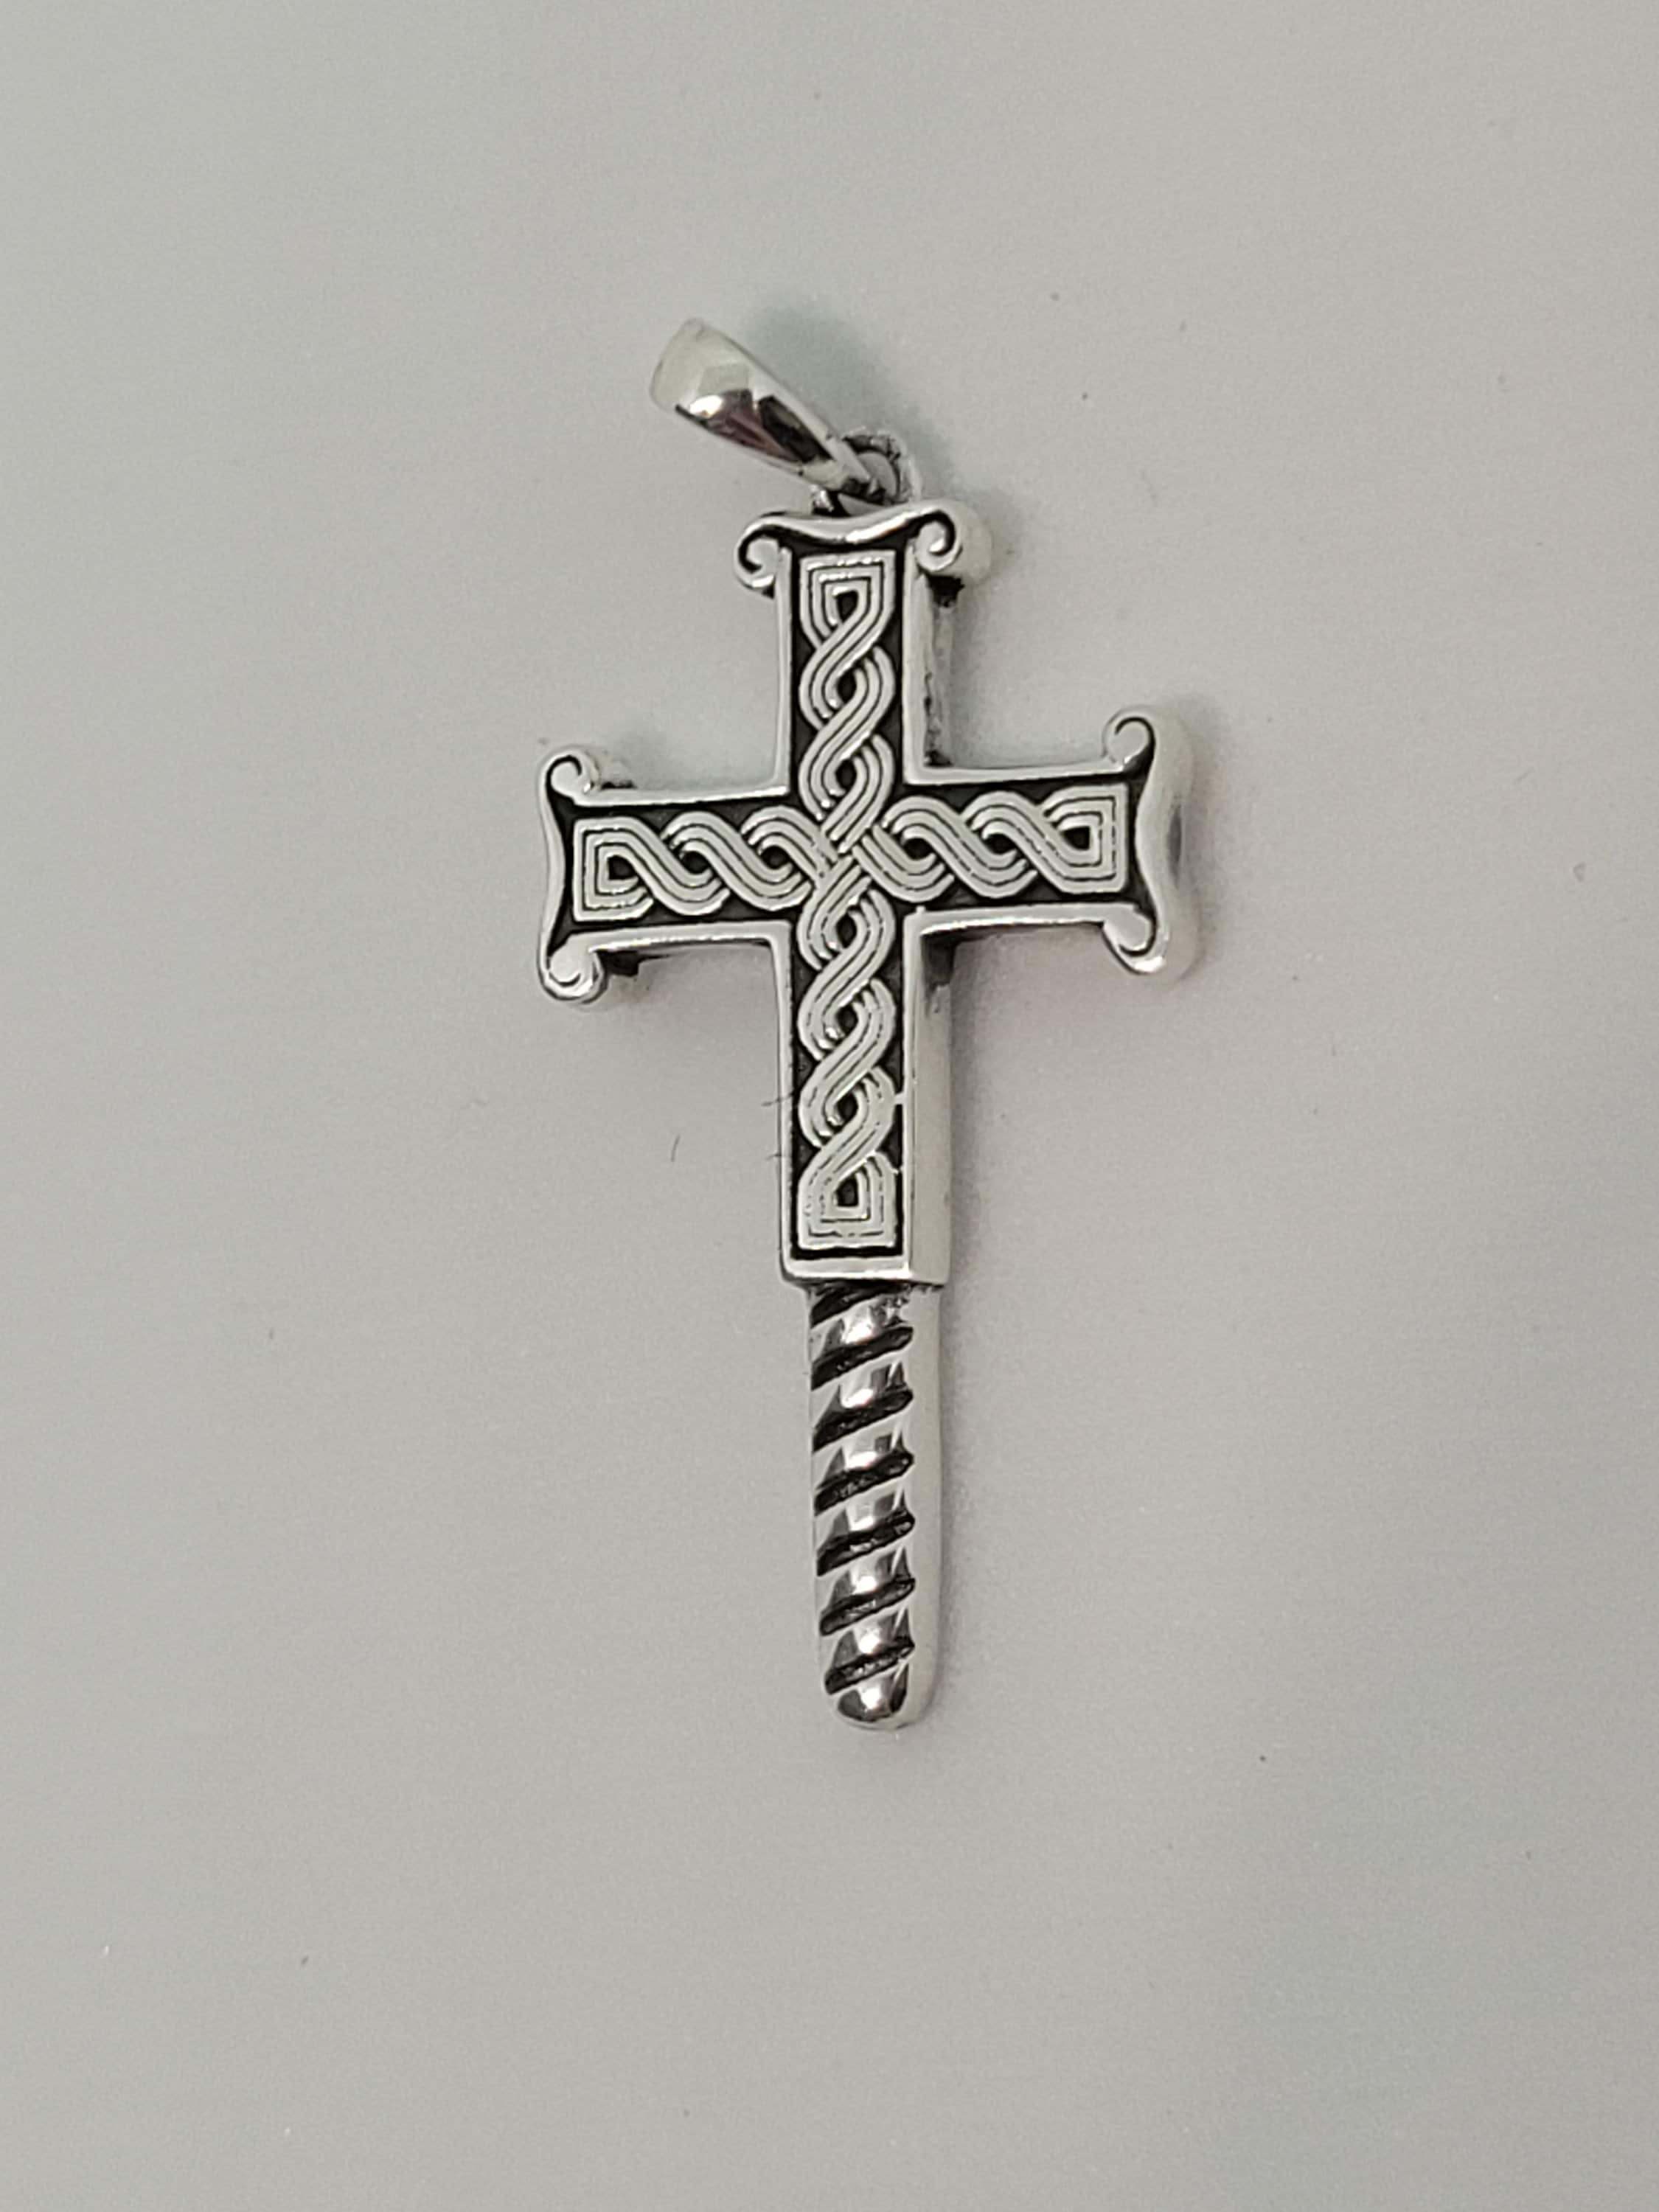 Croatia Pendant Charm, Size SMALL Jewellery, Hrvatska Hrvatski Stari Grb,  Croatian Jewelry, for chain or necklace (not included), Silver